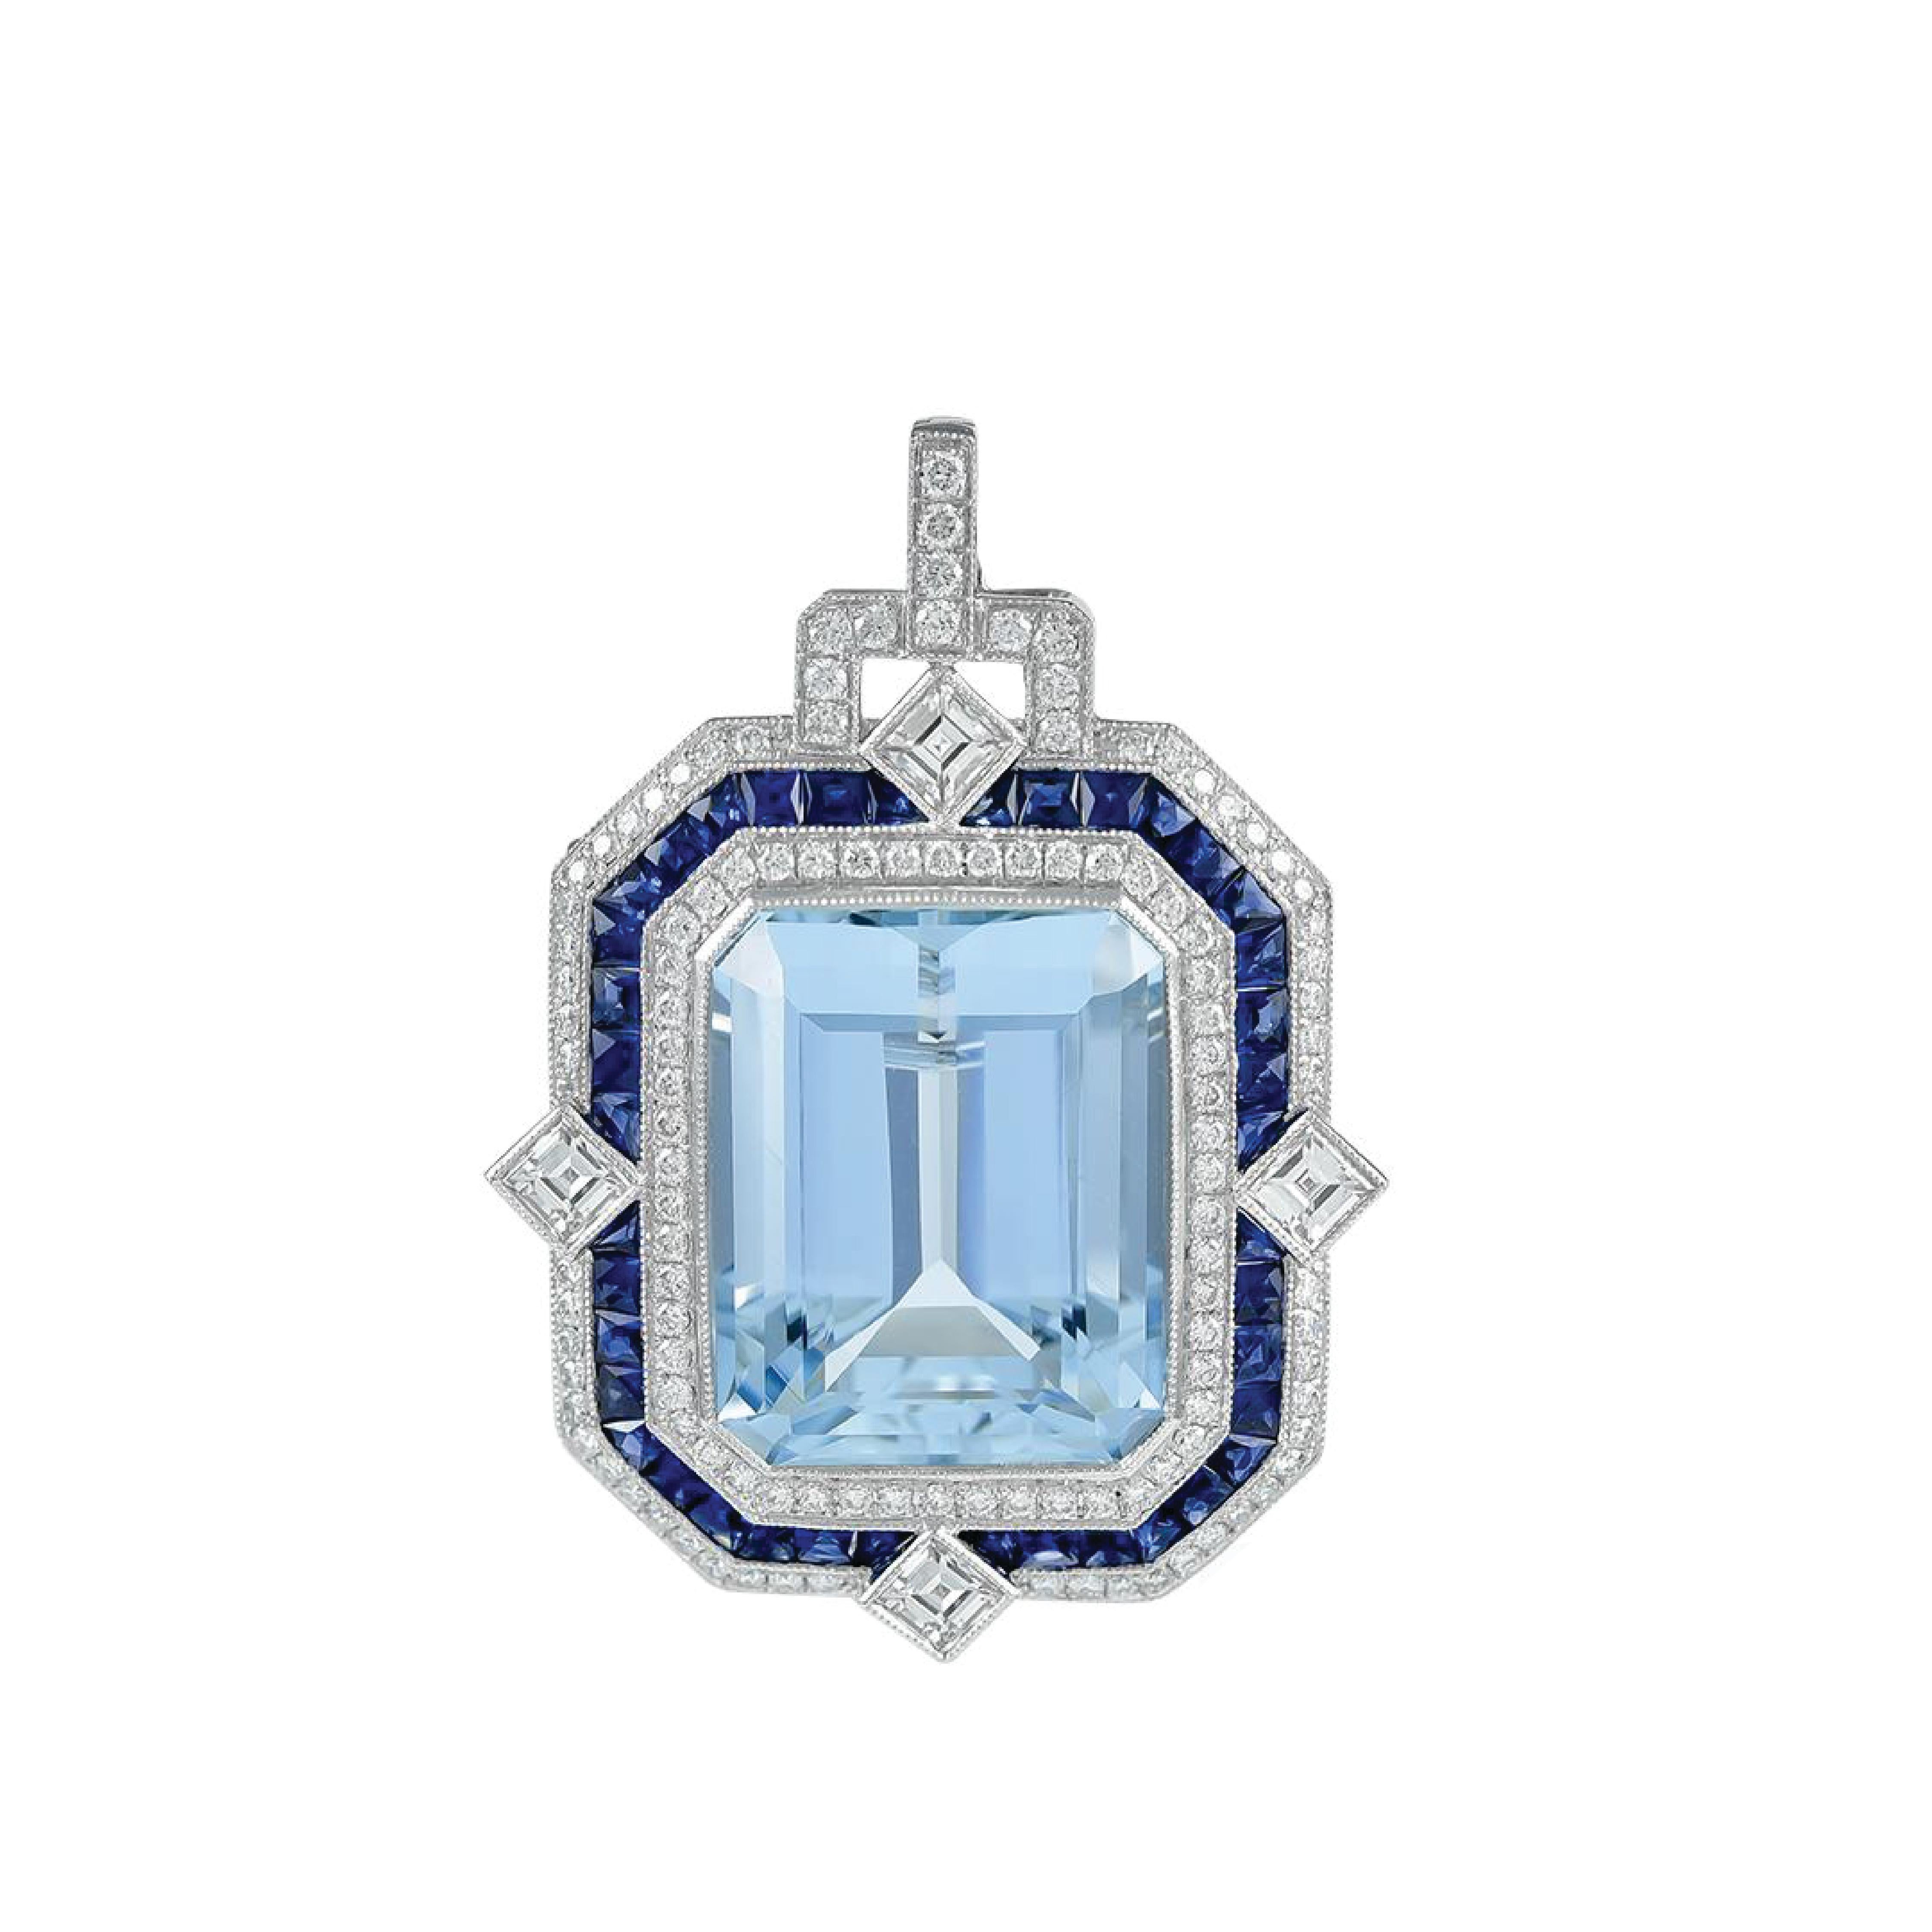 Platinum Set Pendant by Sophia D with 24.38 carats Aquamarine Center accented by Sapphires weighing 3.77 carats and Diamonds with a 3.68 carat total weight.

Sophia D by Joseph Dardashti LTD has been known worldwide for 35 years and are inspired by